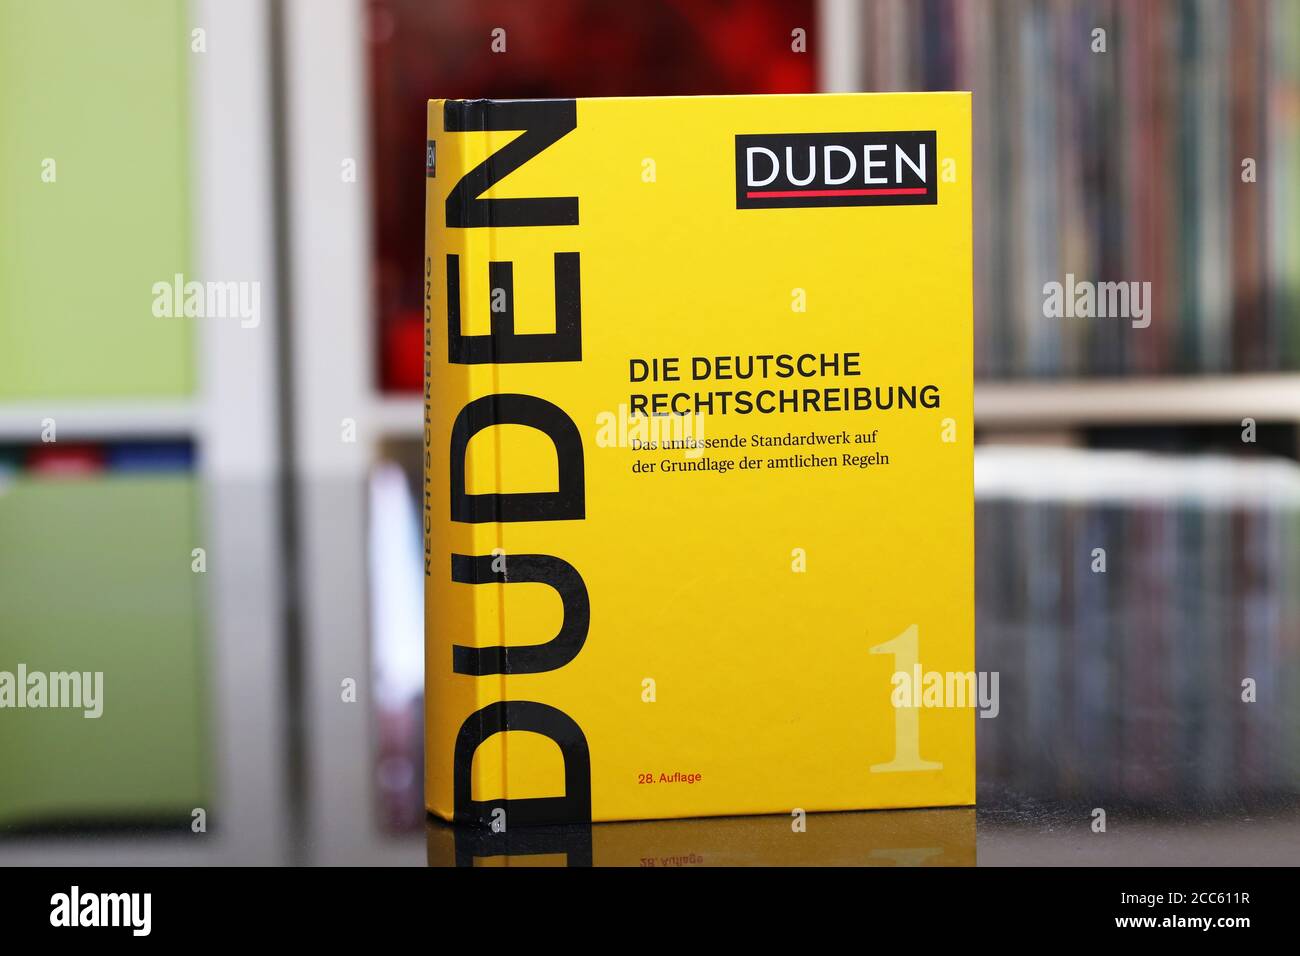 The 28th edition of the Duden, published on 12 August 2020 Stock Photo